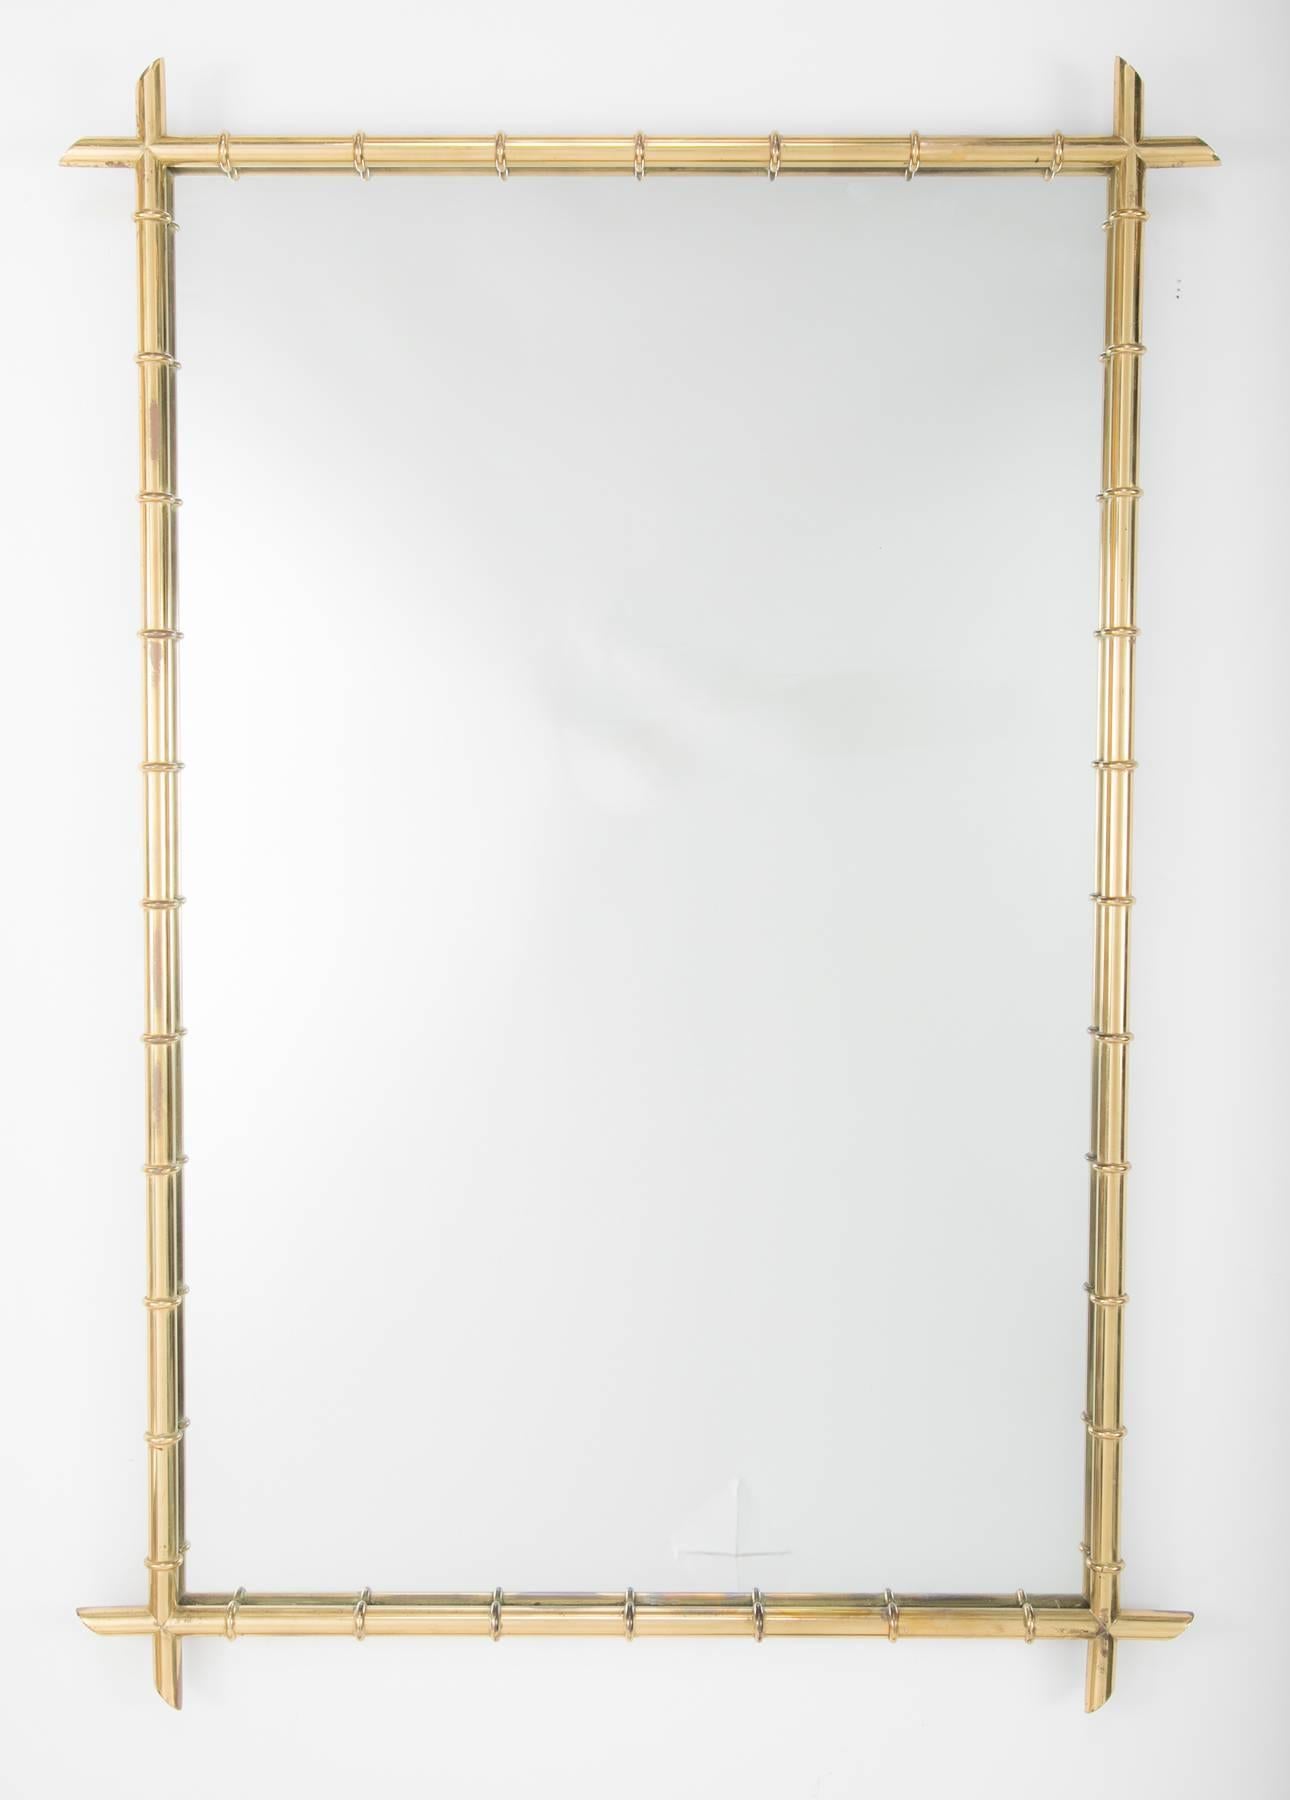 Hollywood Regency faux bamboo brass mirror in the style of Billy Haines. Good scale, 4 feet by 33 inches. 